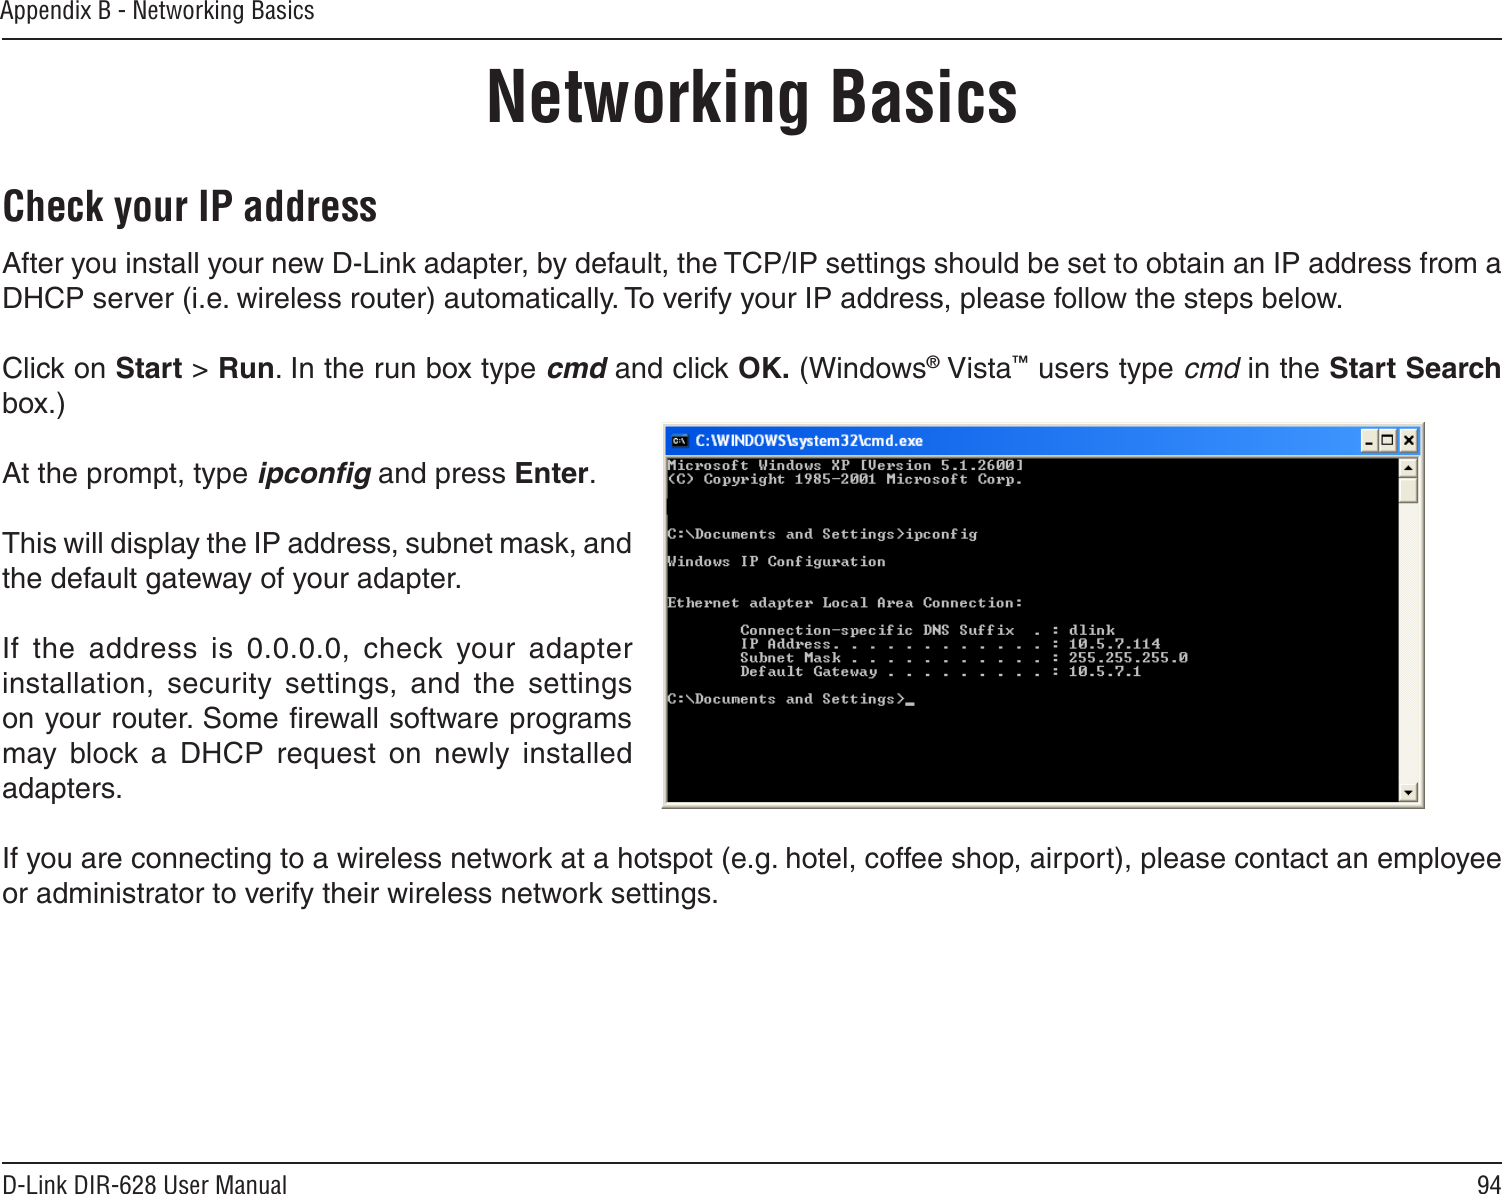 94D-Link DIR-628 User ManualAppendix B - Networking BasicsNetworking BasicsCheck your IP addressAfter you install your new D-Link adapter, by default, the TCP/IP settings should be set to obtain an IP address from a DHCP server (i.e. wireless router) automatically. To verify your IP address, please follow the steps below.Click on Start &gt; Run. In the run box type cmd and click OK. (Windows® Vista™ users type cmd in the Start Search box.)At the prompt, type ipconﬁg and press Enter.This will display the IP address, subnet mask, and the default gateway of your adapter.If  the  address  is  0.0.0.0,  check  your  adapter installation,  security  settings,  and  the  settings on your router. Some ﬁrewall software programs may  block  a  DHCP  request  on  newly  installed adapters. If you are connecting to a wireless network at a hotspot (e.g. hotel, coffee shop, airport), please contact an employee or administrator to verify their wireless network settings.